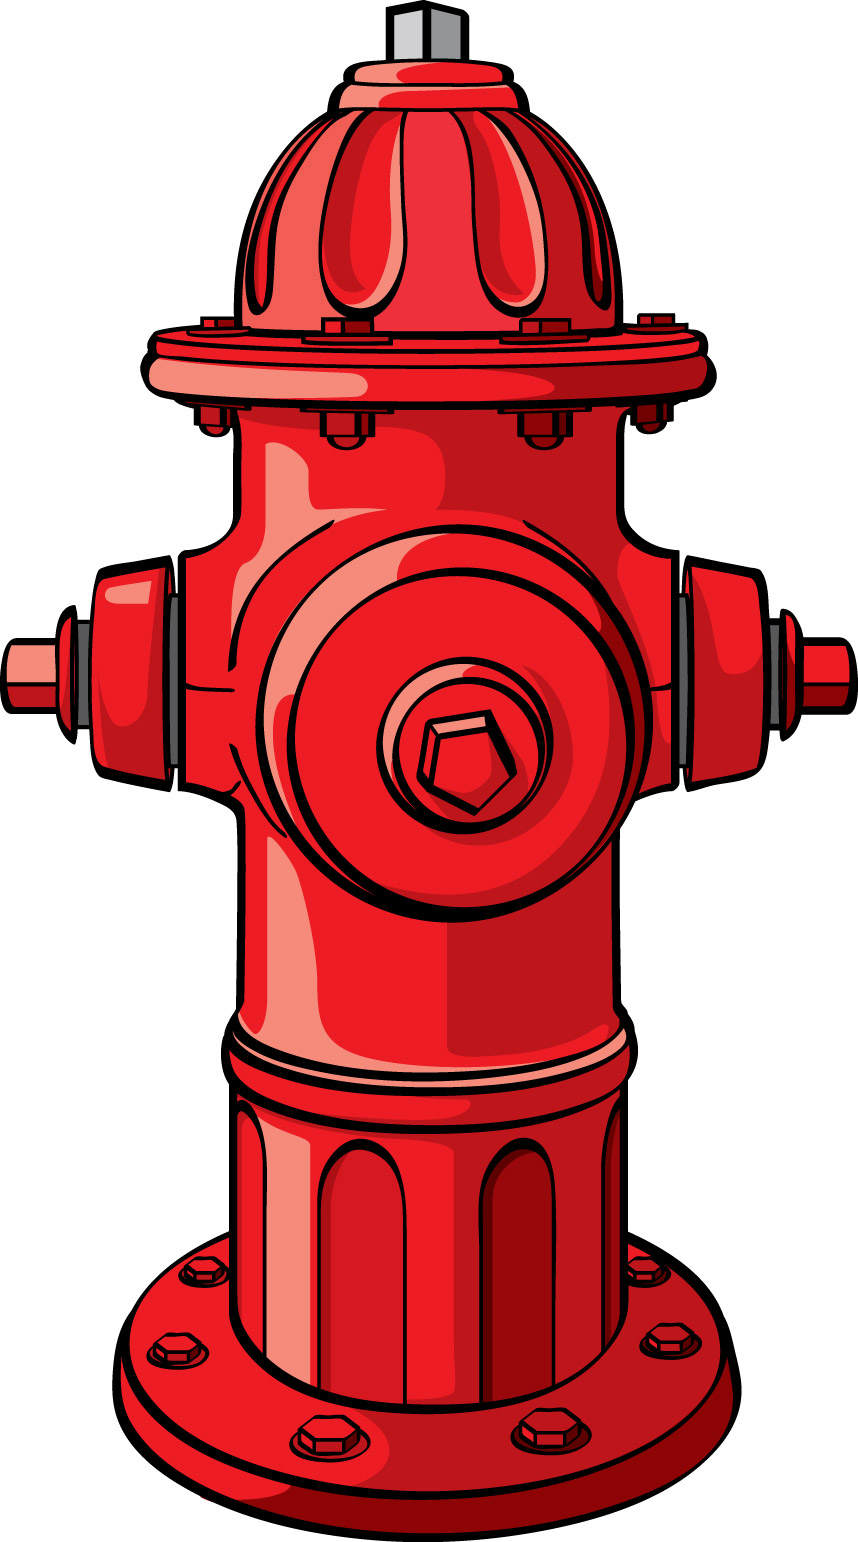 The Use Of Fire Hydrants In T - Fire Hydrant Clipart